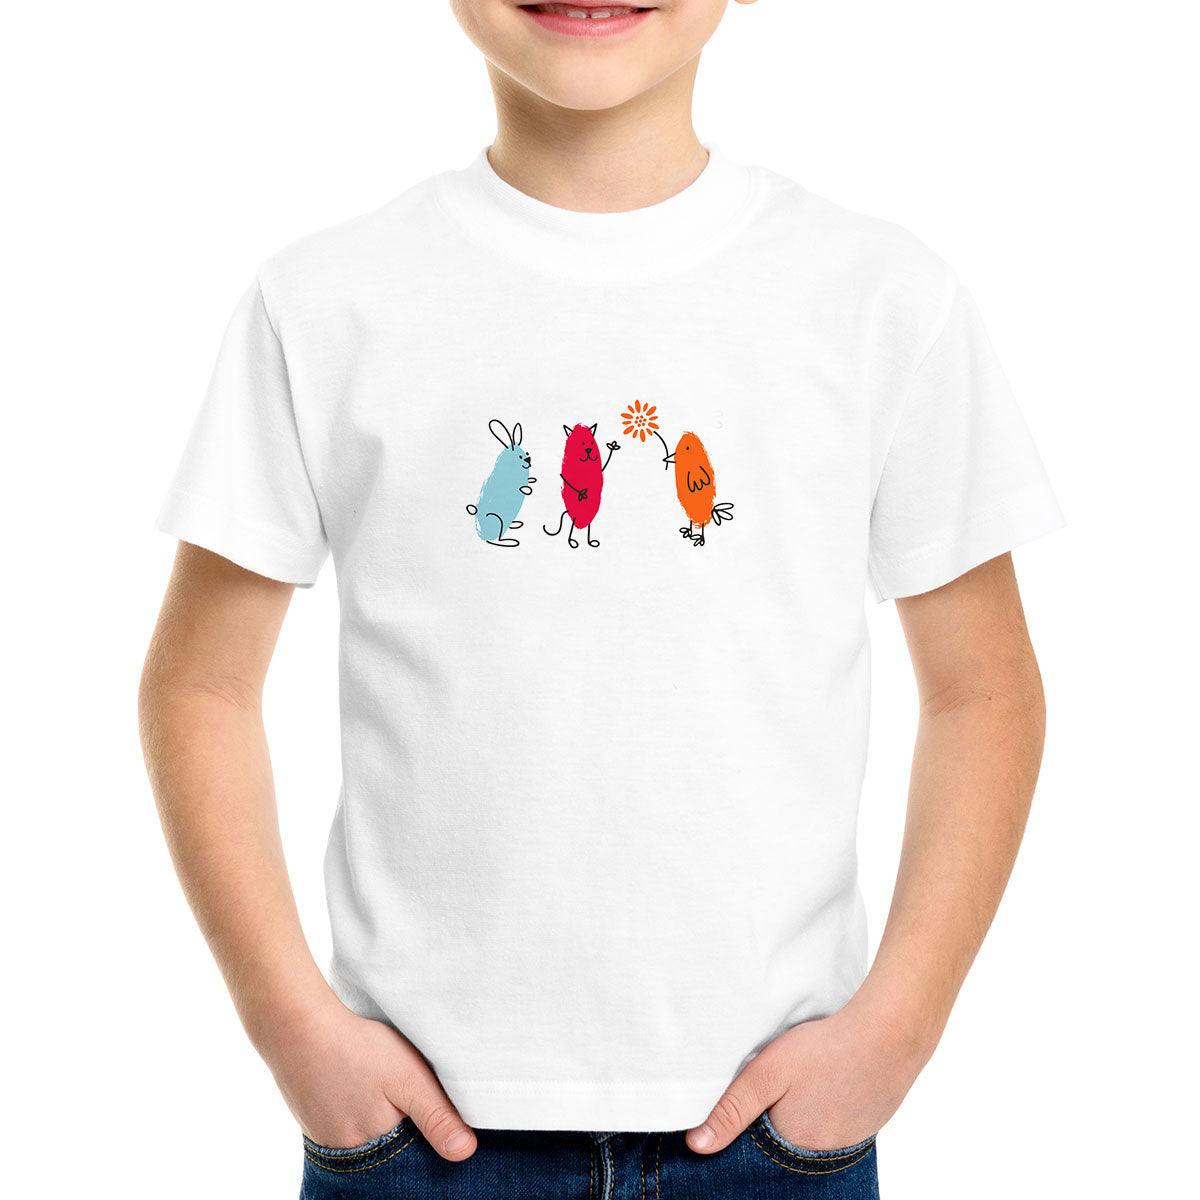 Daisy Appeal Kids Charity T-Shirt - 3 Designs